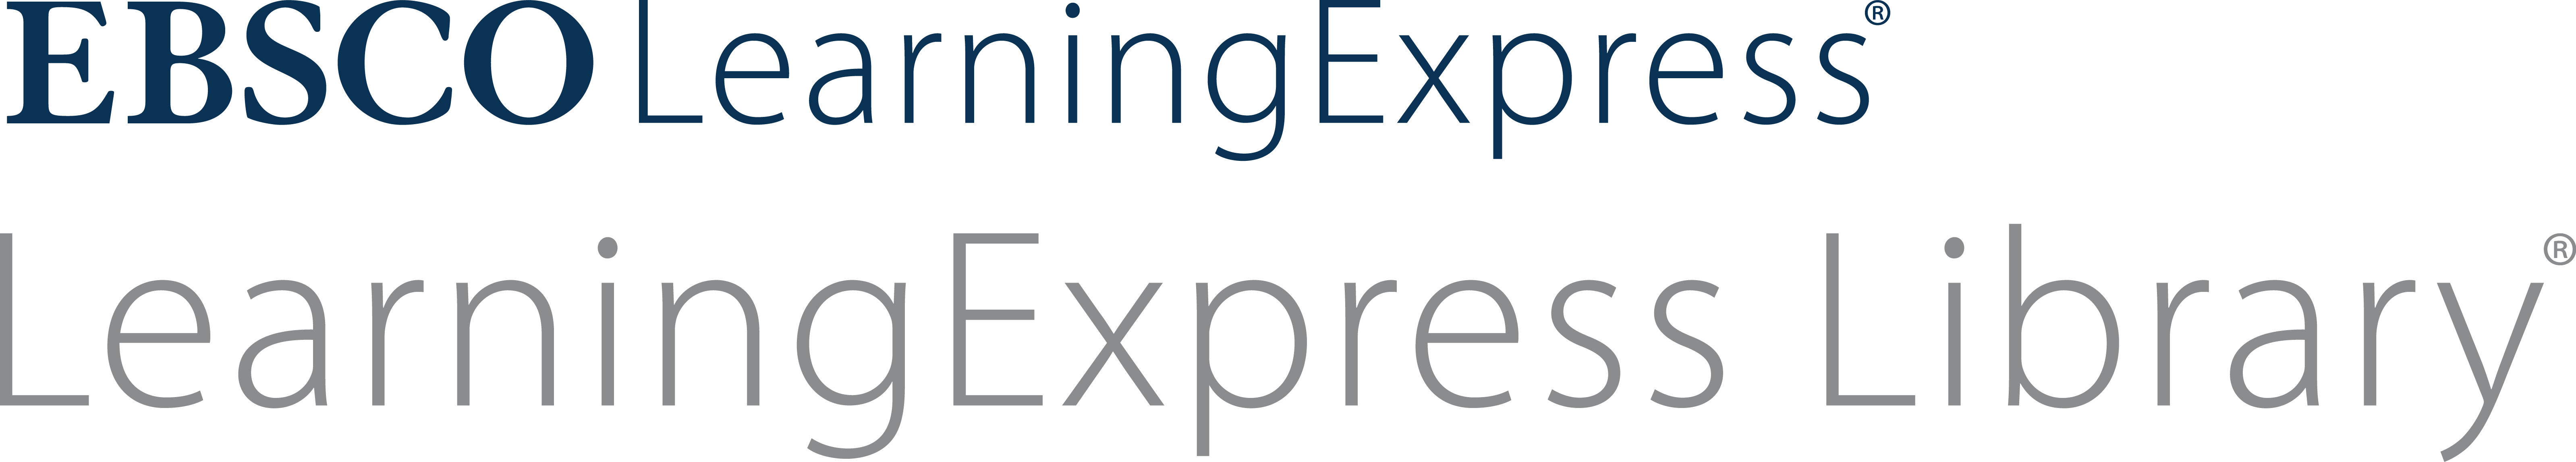 EBSCO Learning Express Library